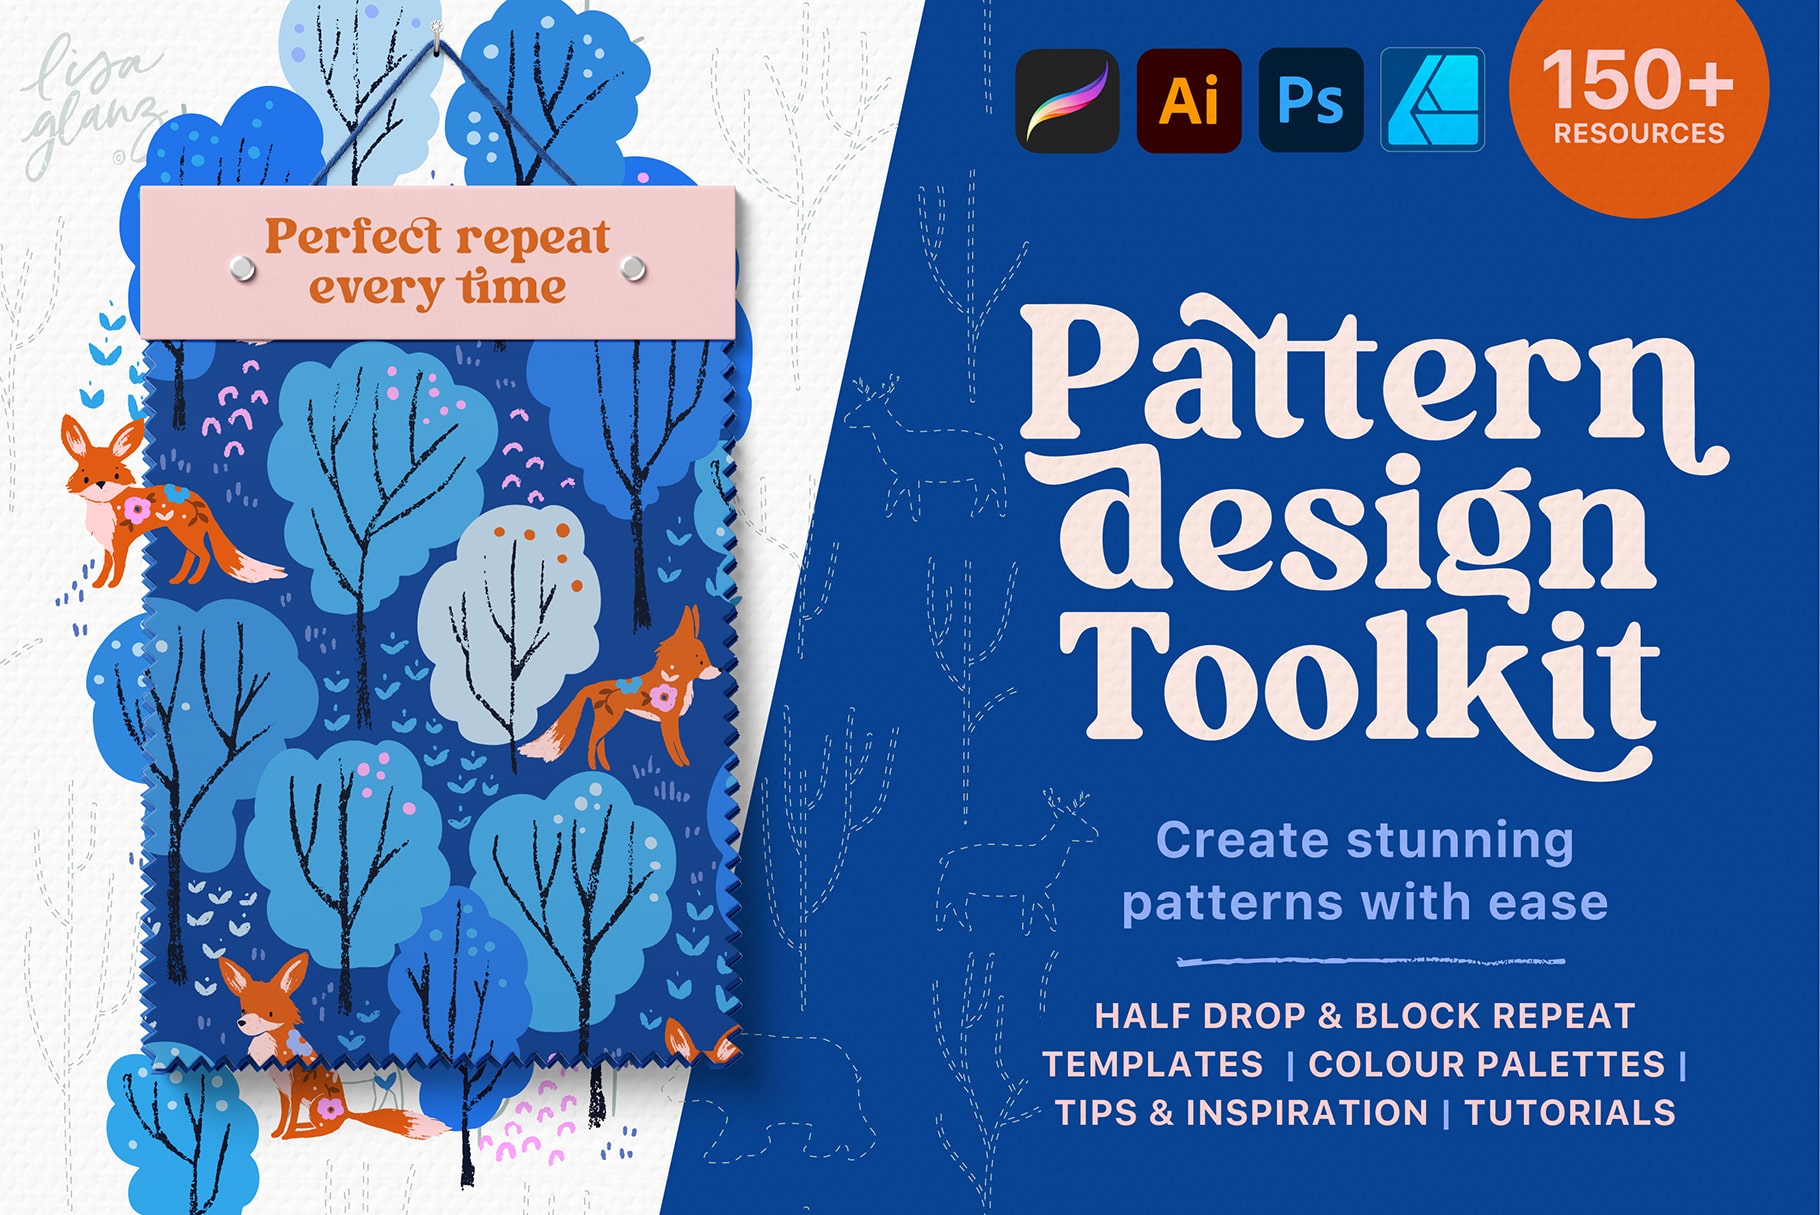 Pattern Design Toolkit – templates for creating the perfect repeat